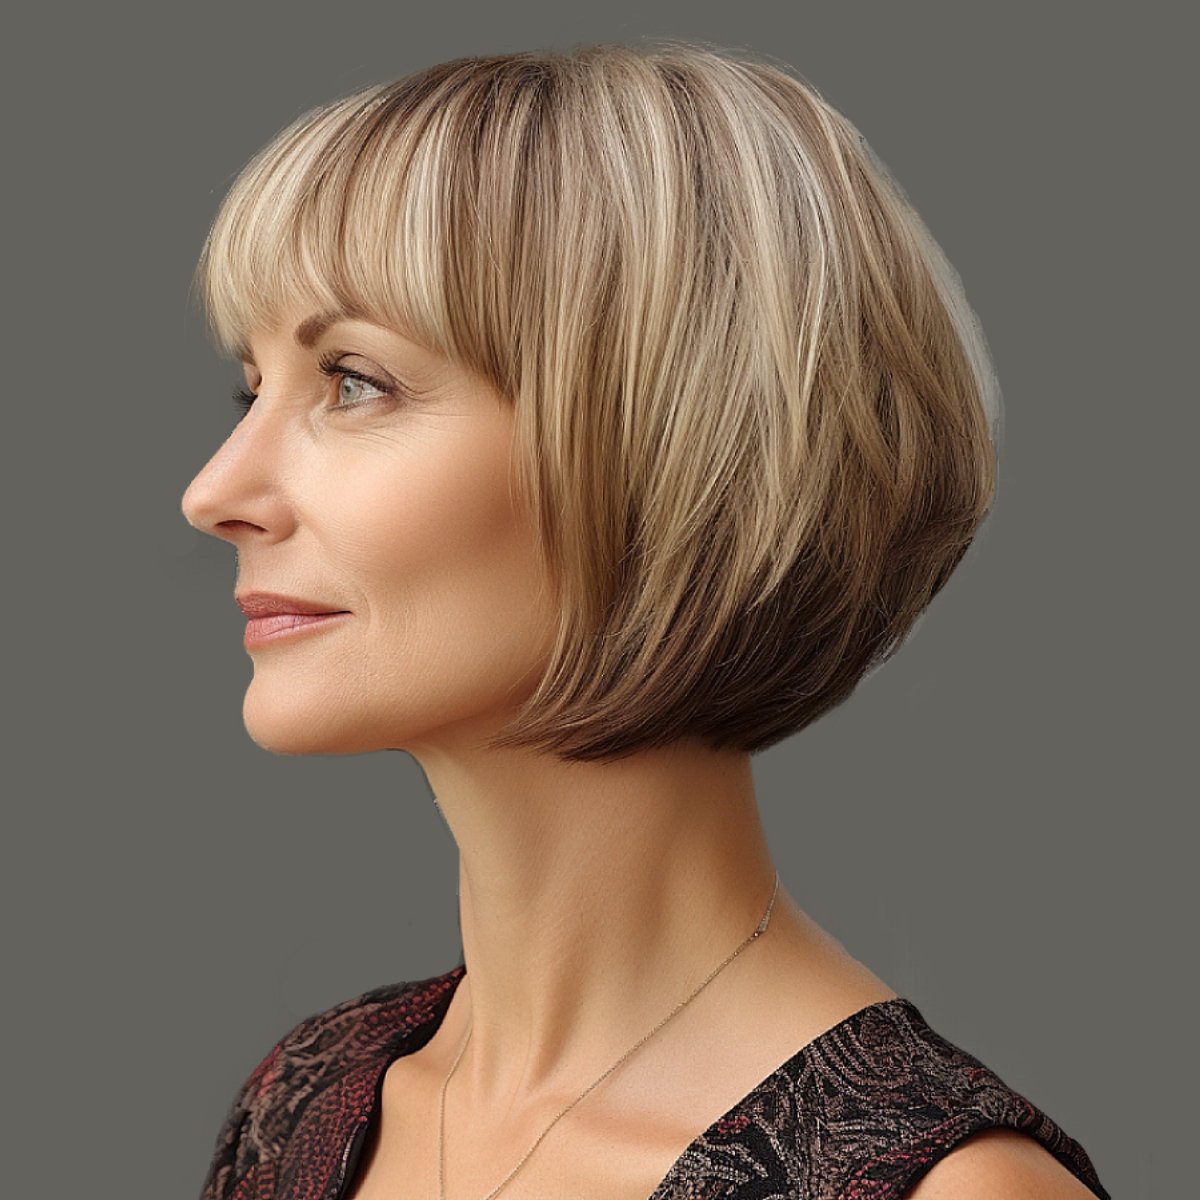 How to Wear a Layered and Stacked Bob | All Things Hair US